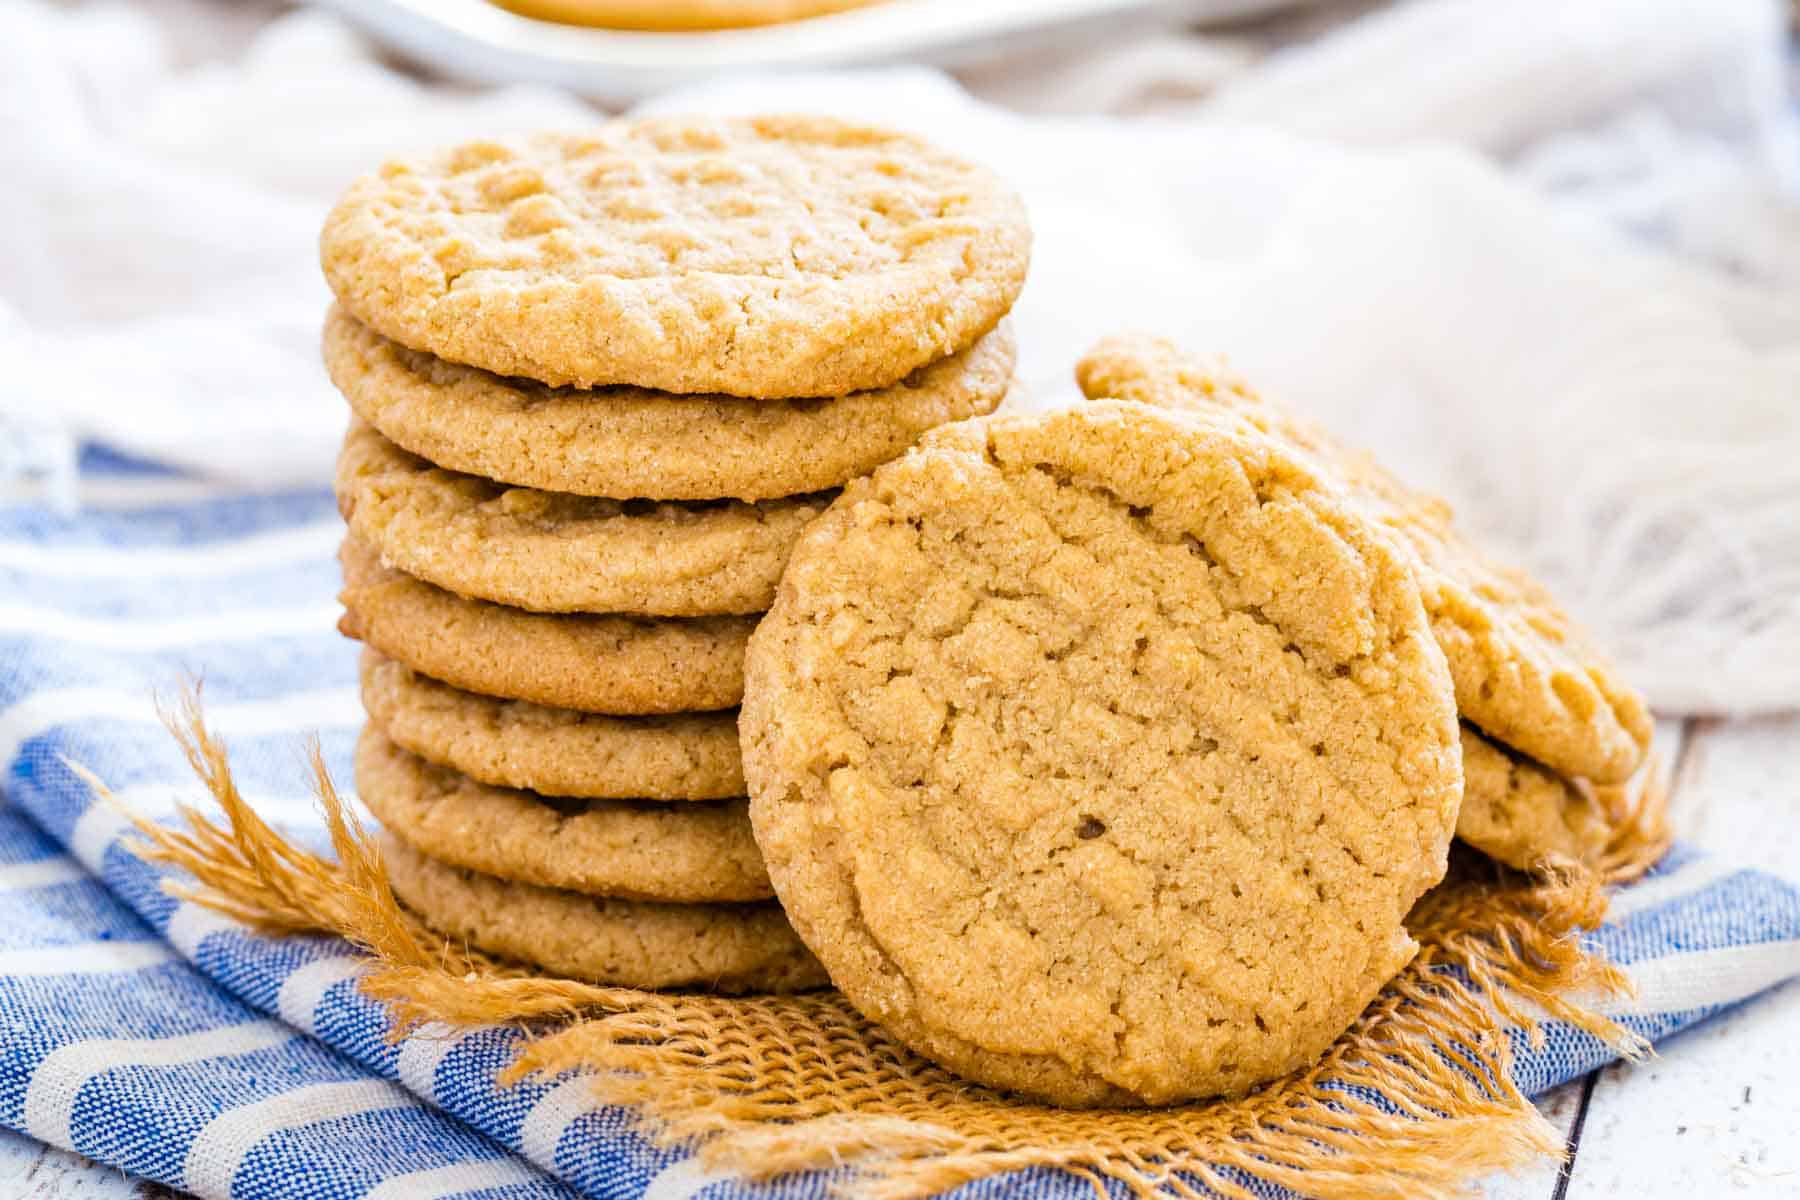 A gluten-free peanut butter cookie leaning against a stack of peanut butter cookies on a blue dishcloth.